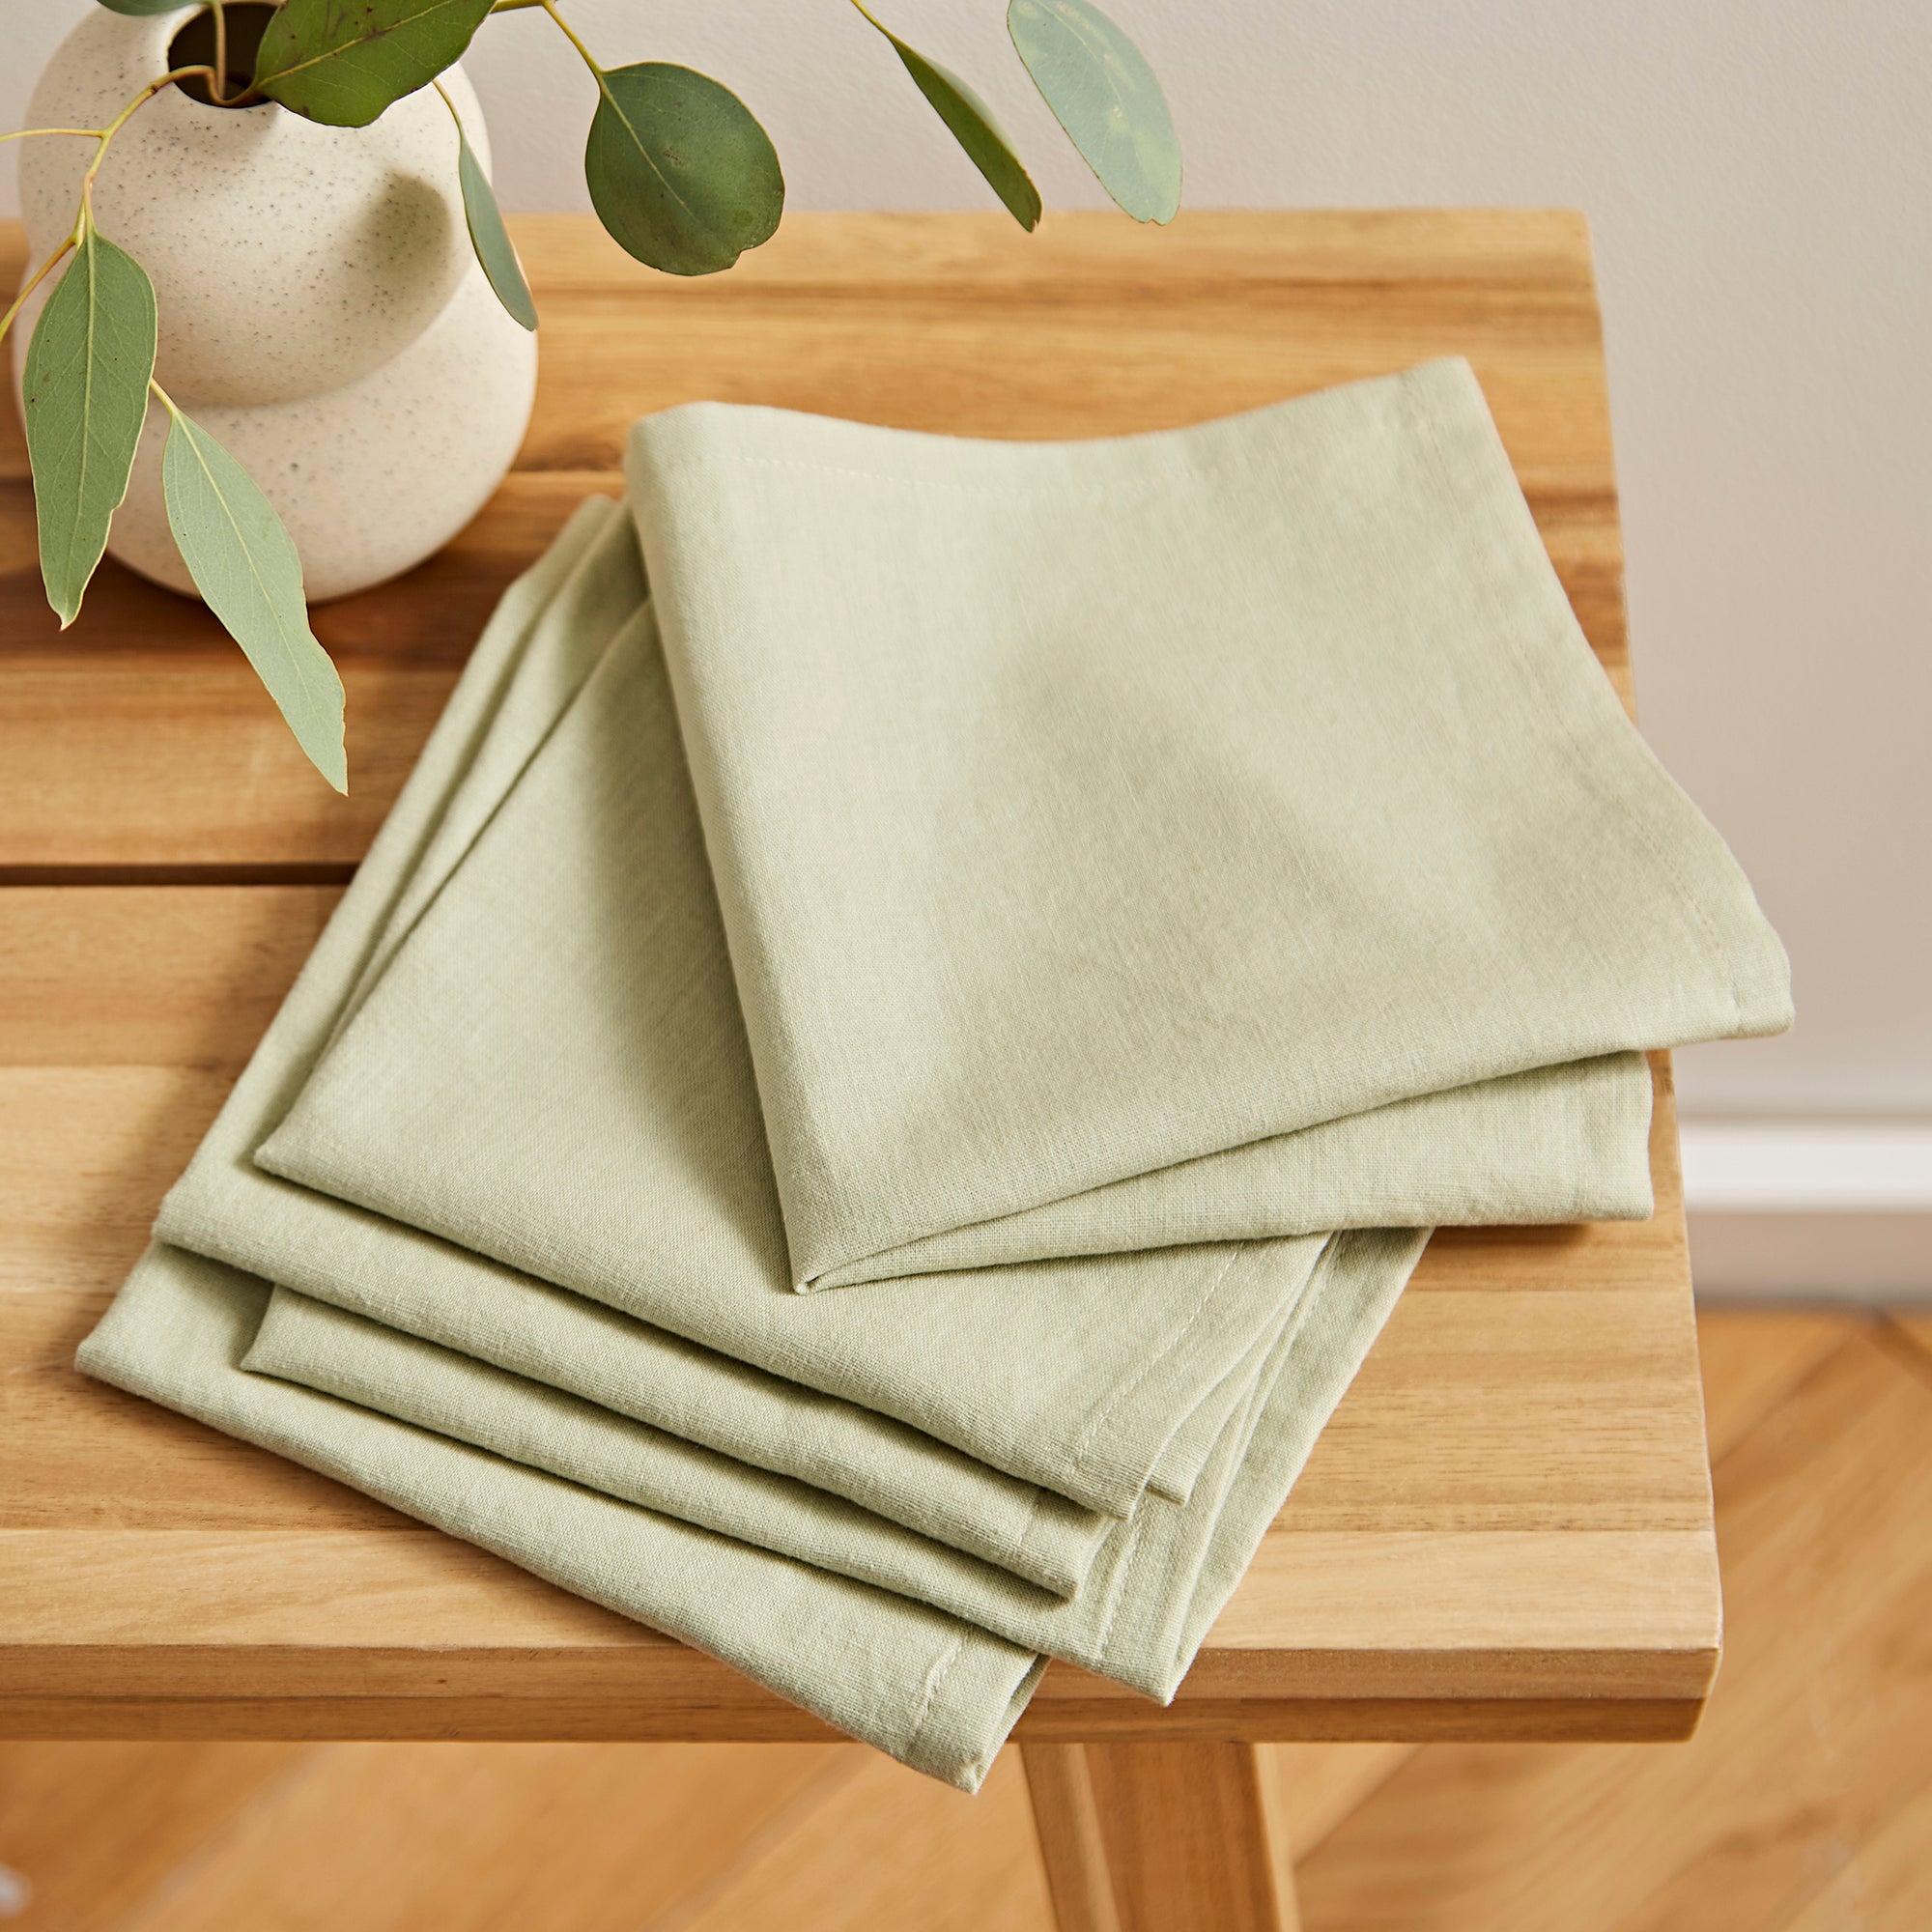 Pack of 5 Washed Cotton Linen Face Cloths